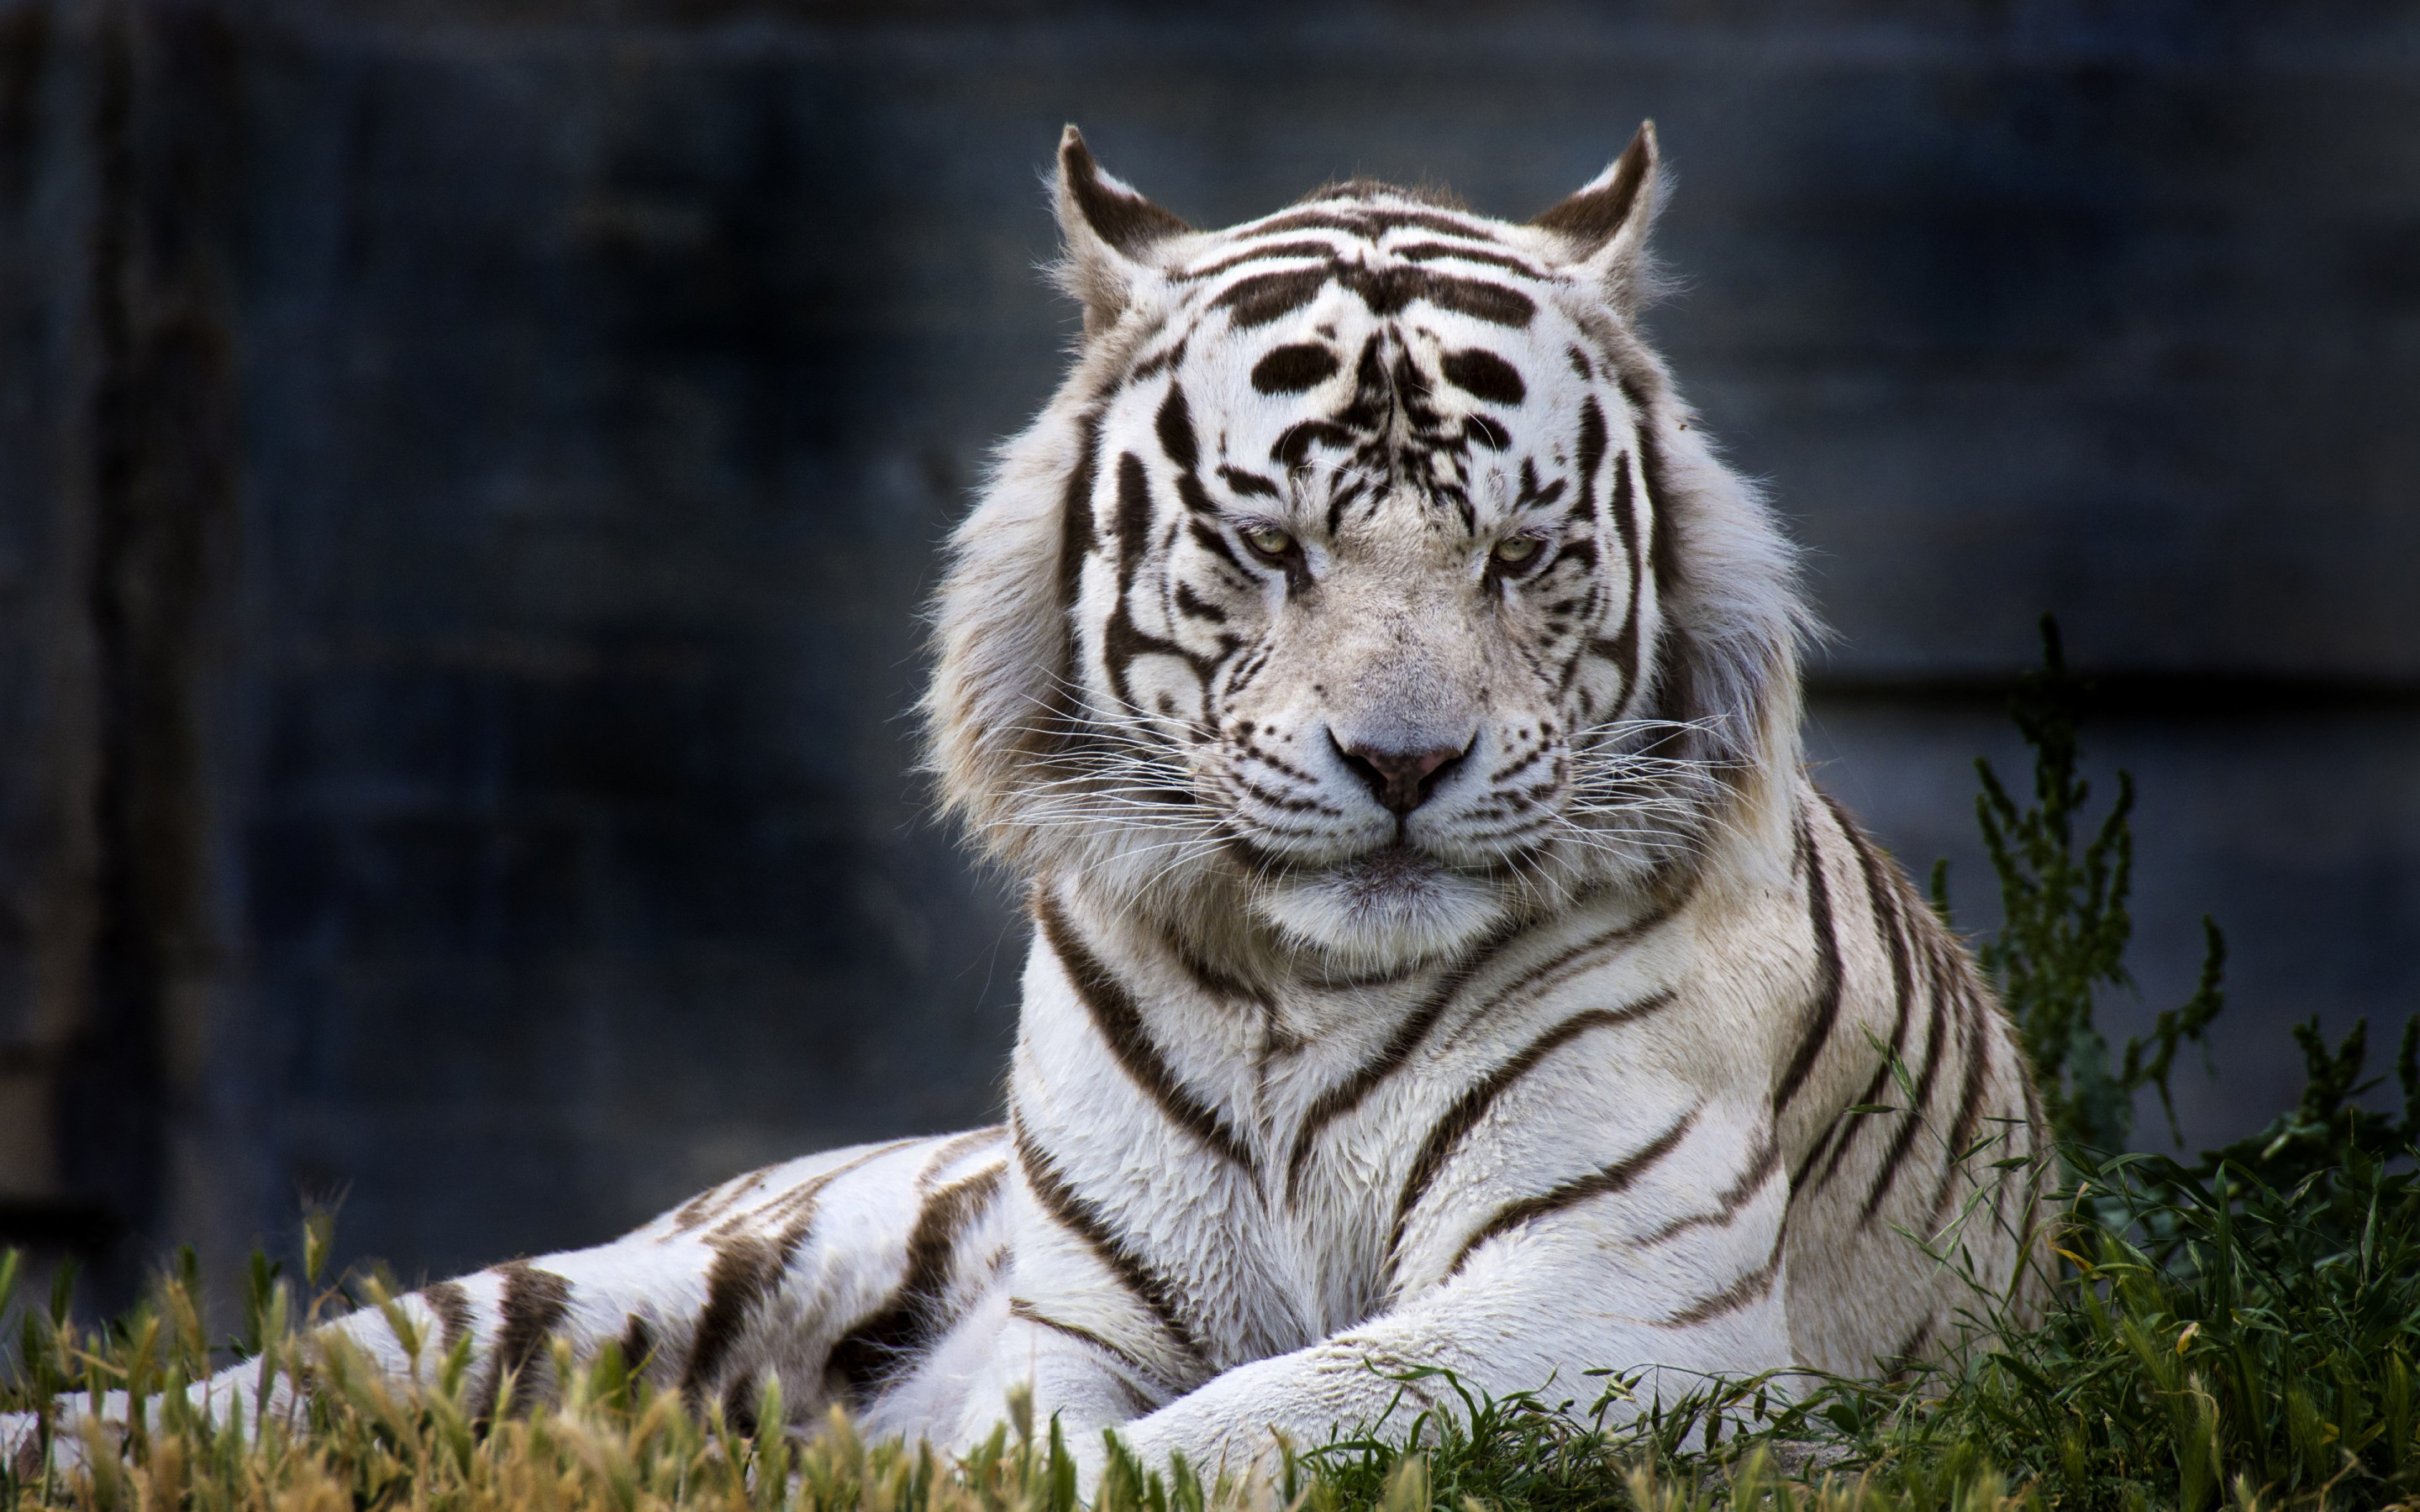 The white tiger from Madrid Zoo wallpaper 2880x1800